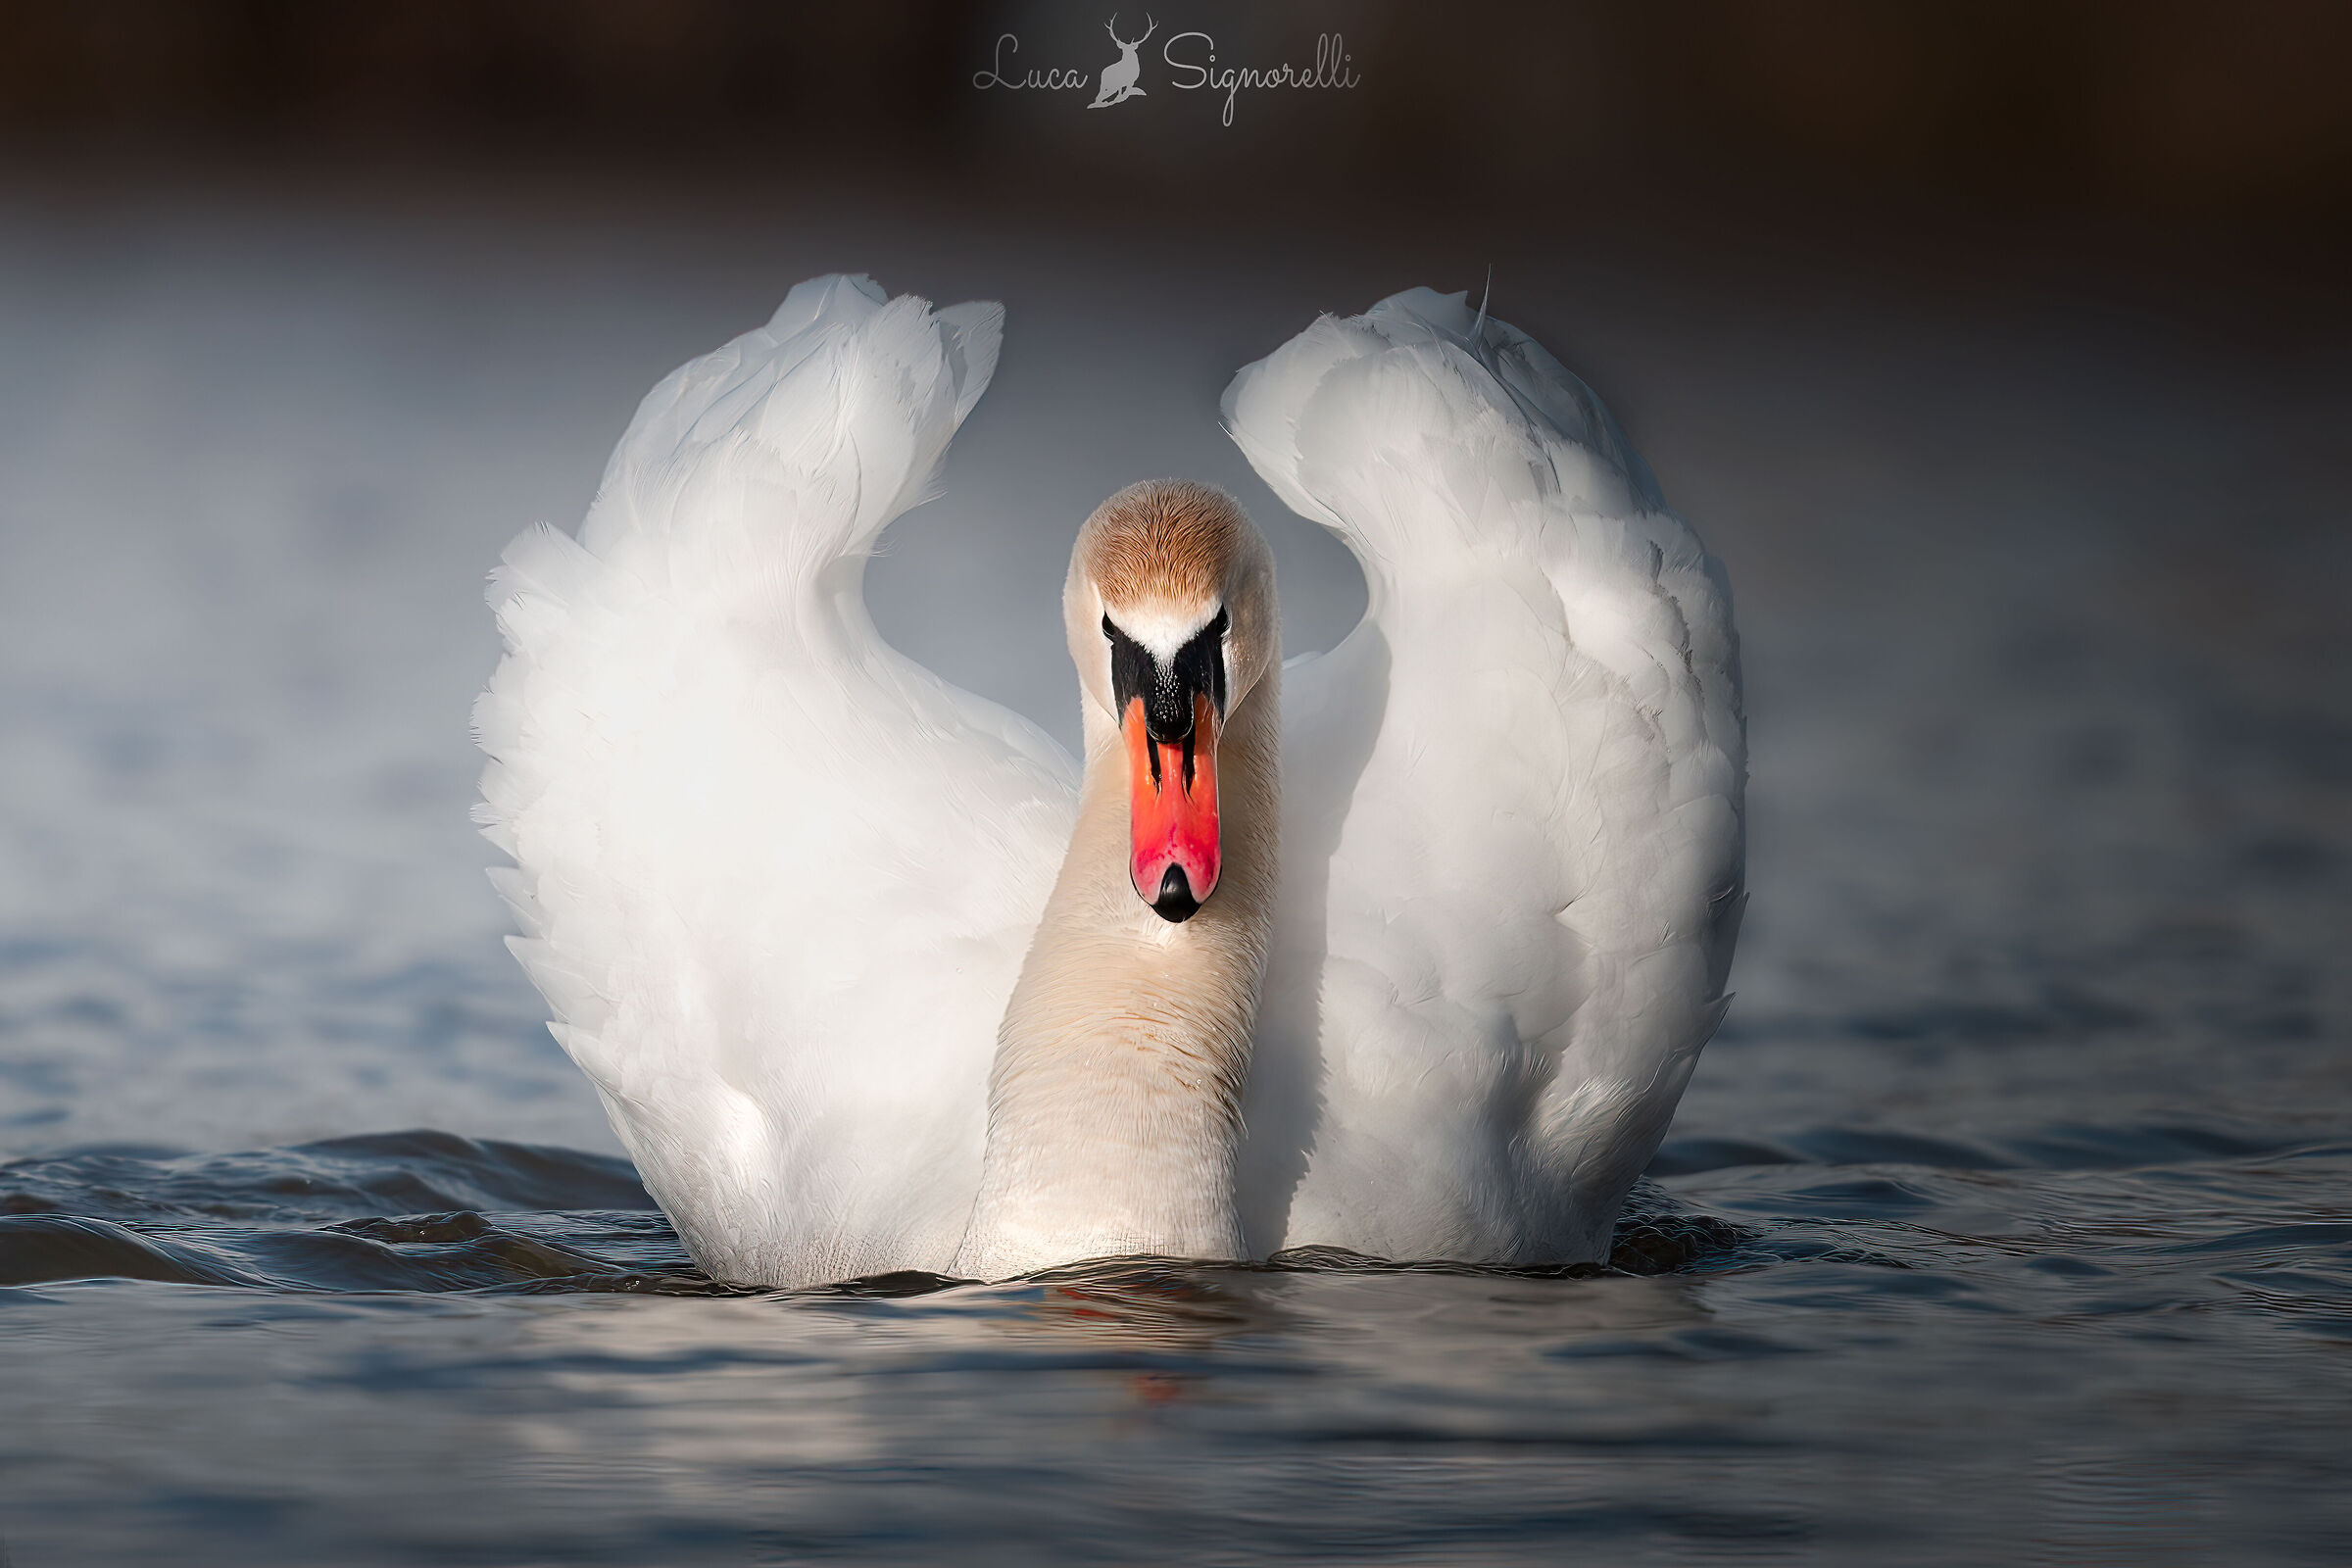 The elegance and beauty of the Royal Swan...